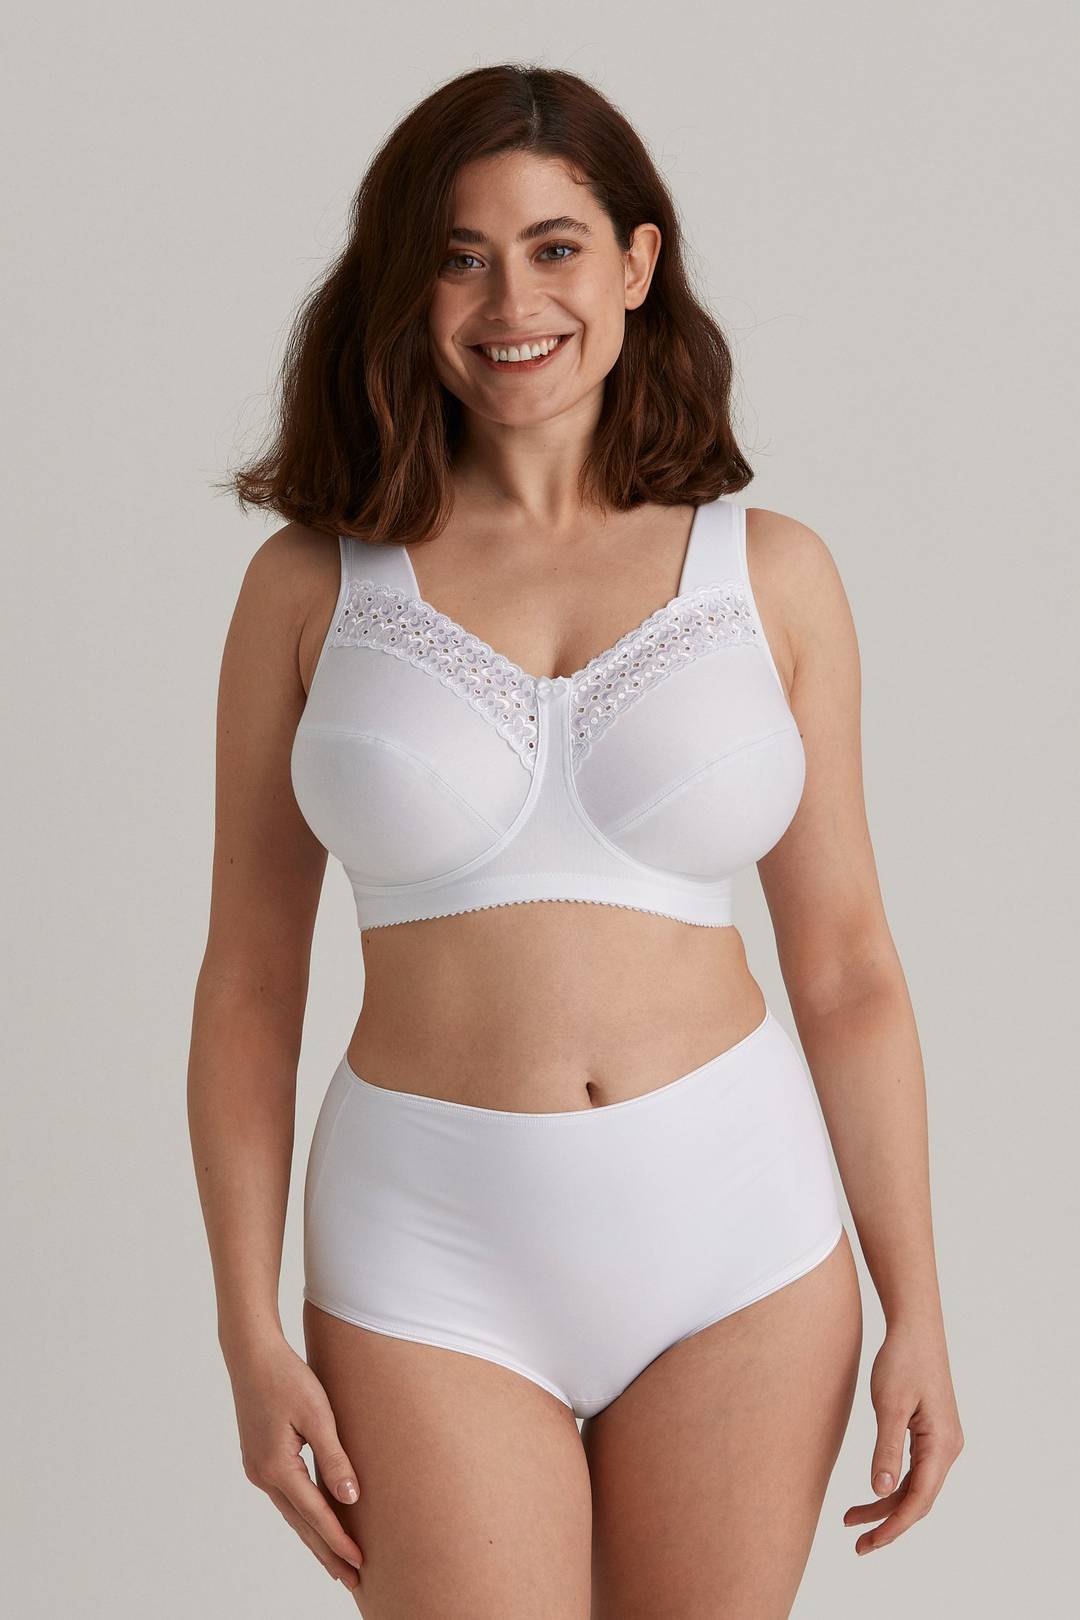 Summer bra – comfortable bra with exclusive embroidery – Miss Mary